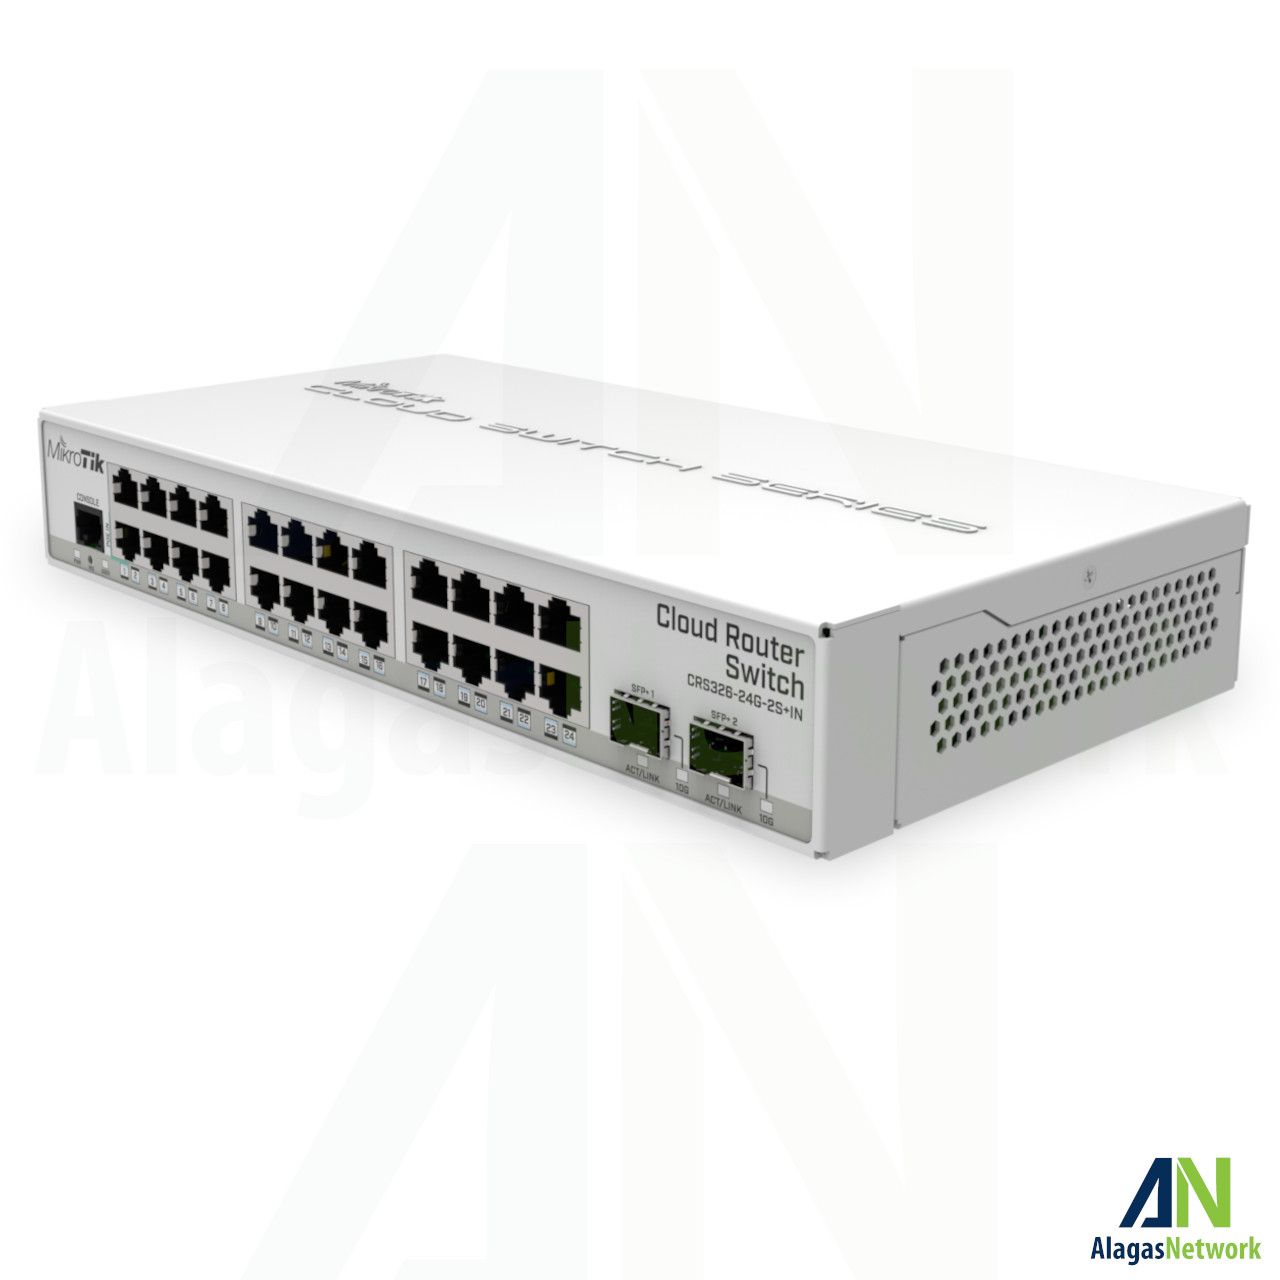 Cloud Router Switch 326-24G-2S+IN